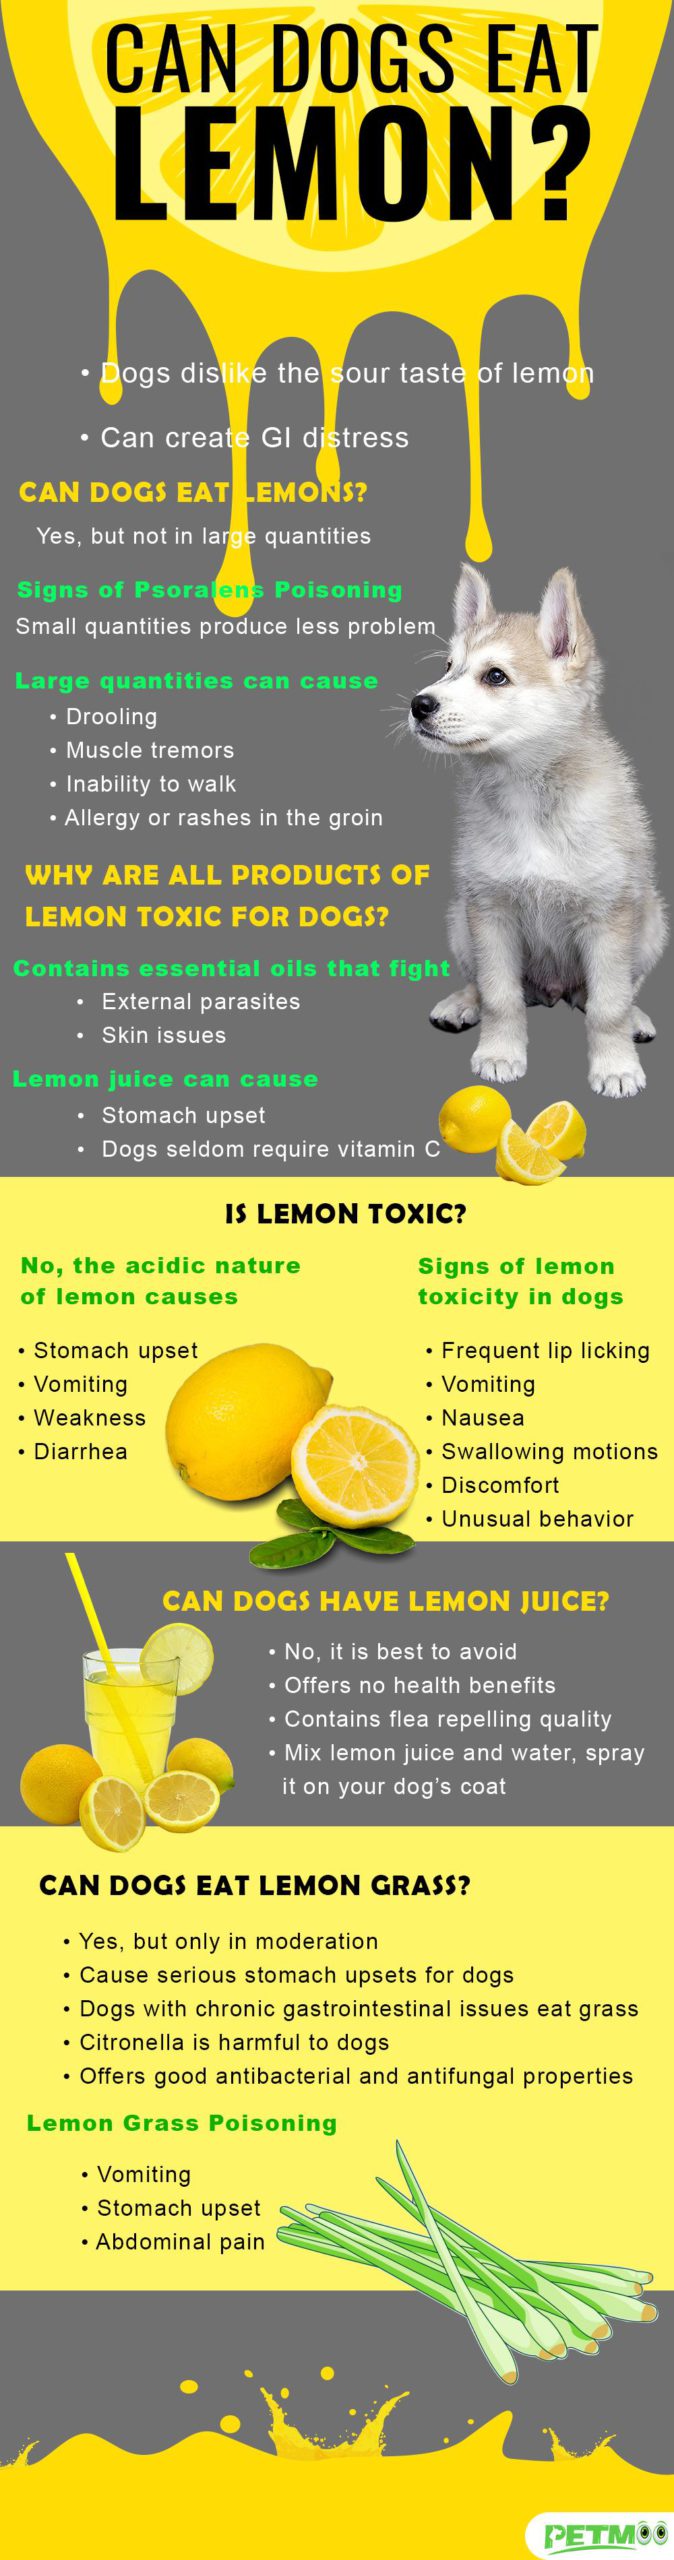 Can Dogs Eat Lemon? Can Dogs Have Lemon 